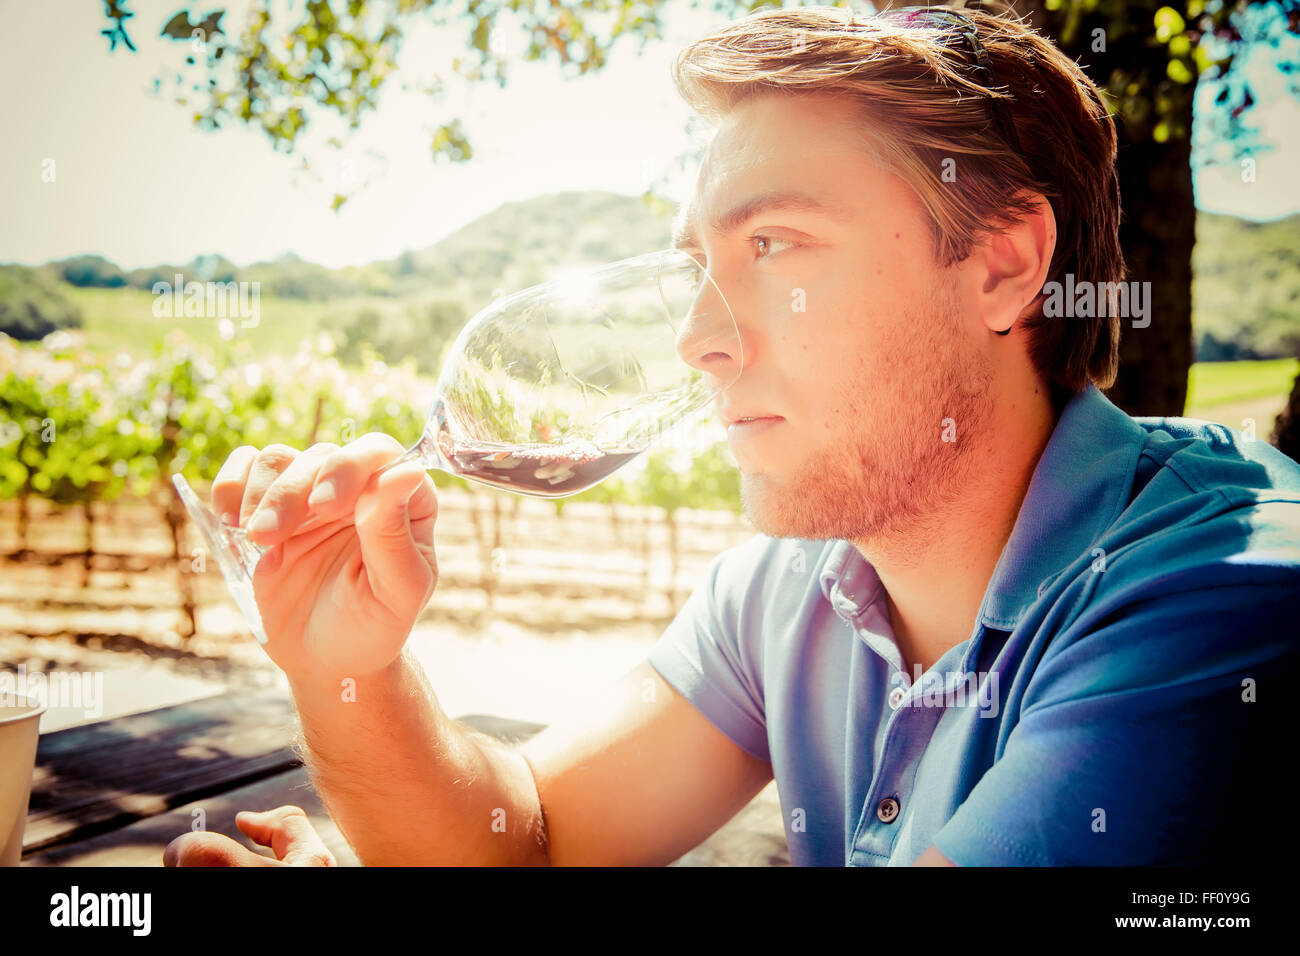 Caucasian man smelling wine in vineyard Banque D'Images